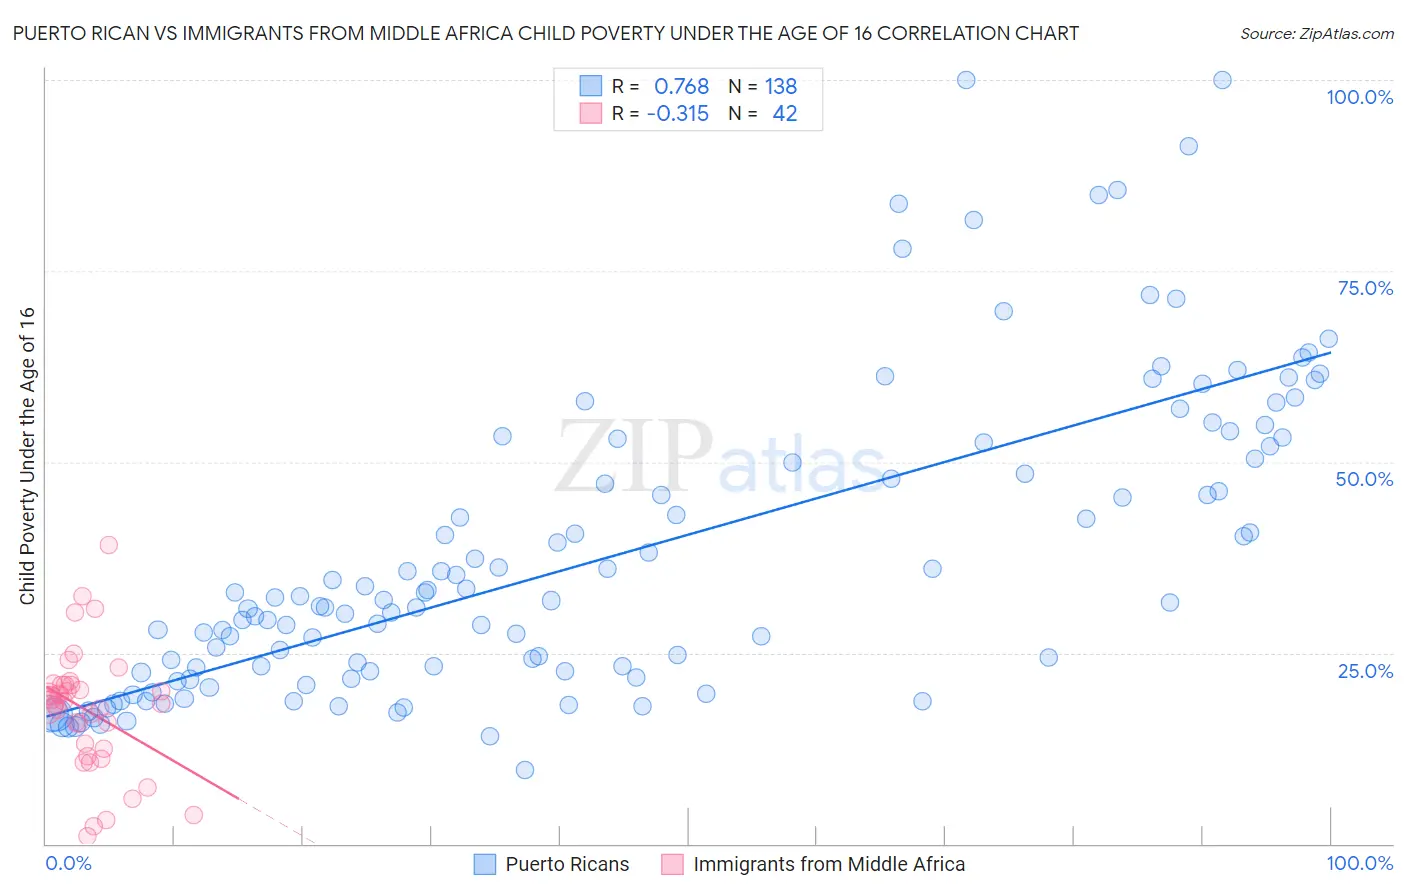 Puerto Rican vs Immigrants from Middle Africa Child Poverty Under the Age of 16